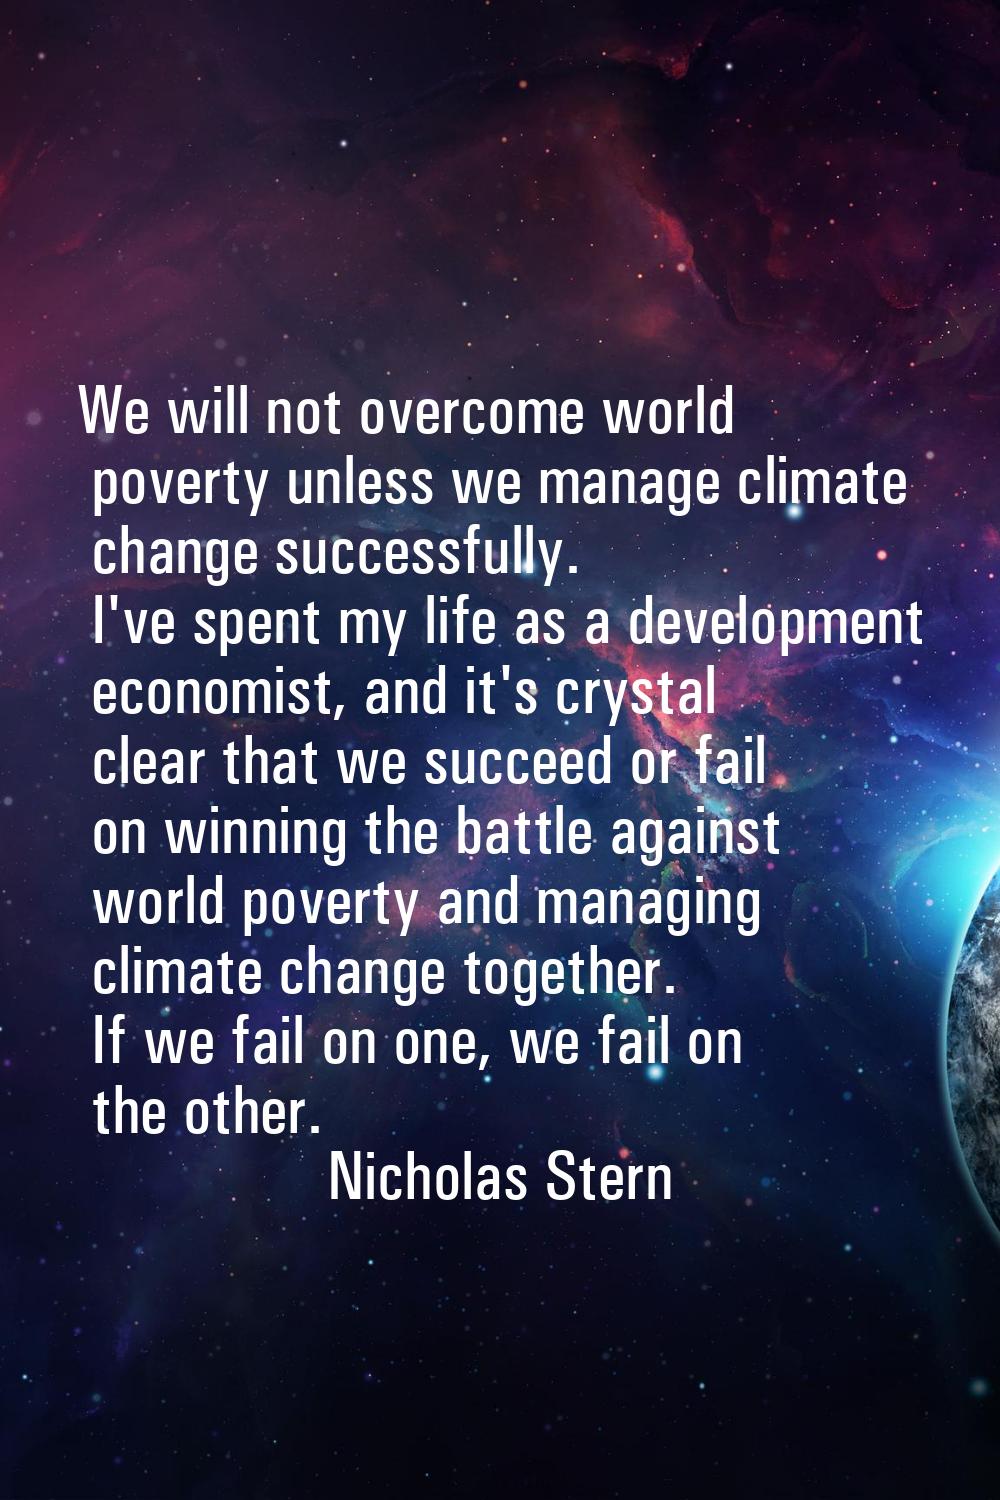 We will not overcome world poverty unless we manage climate change successfully. I've spent my life